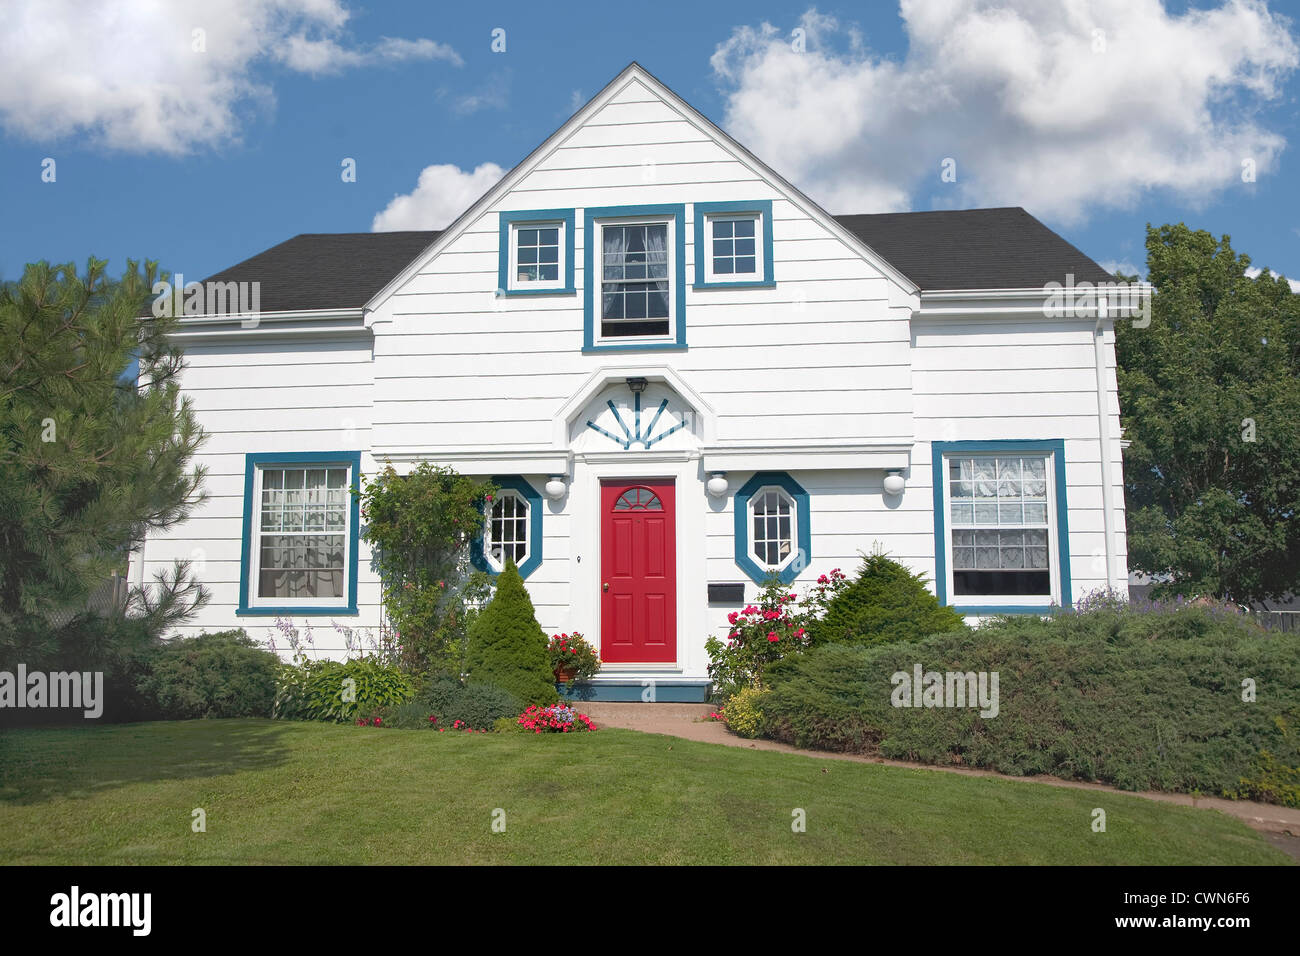 Older style traditional two story home with colorful flowers. Stock Photo